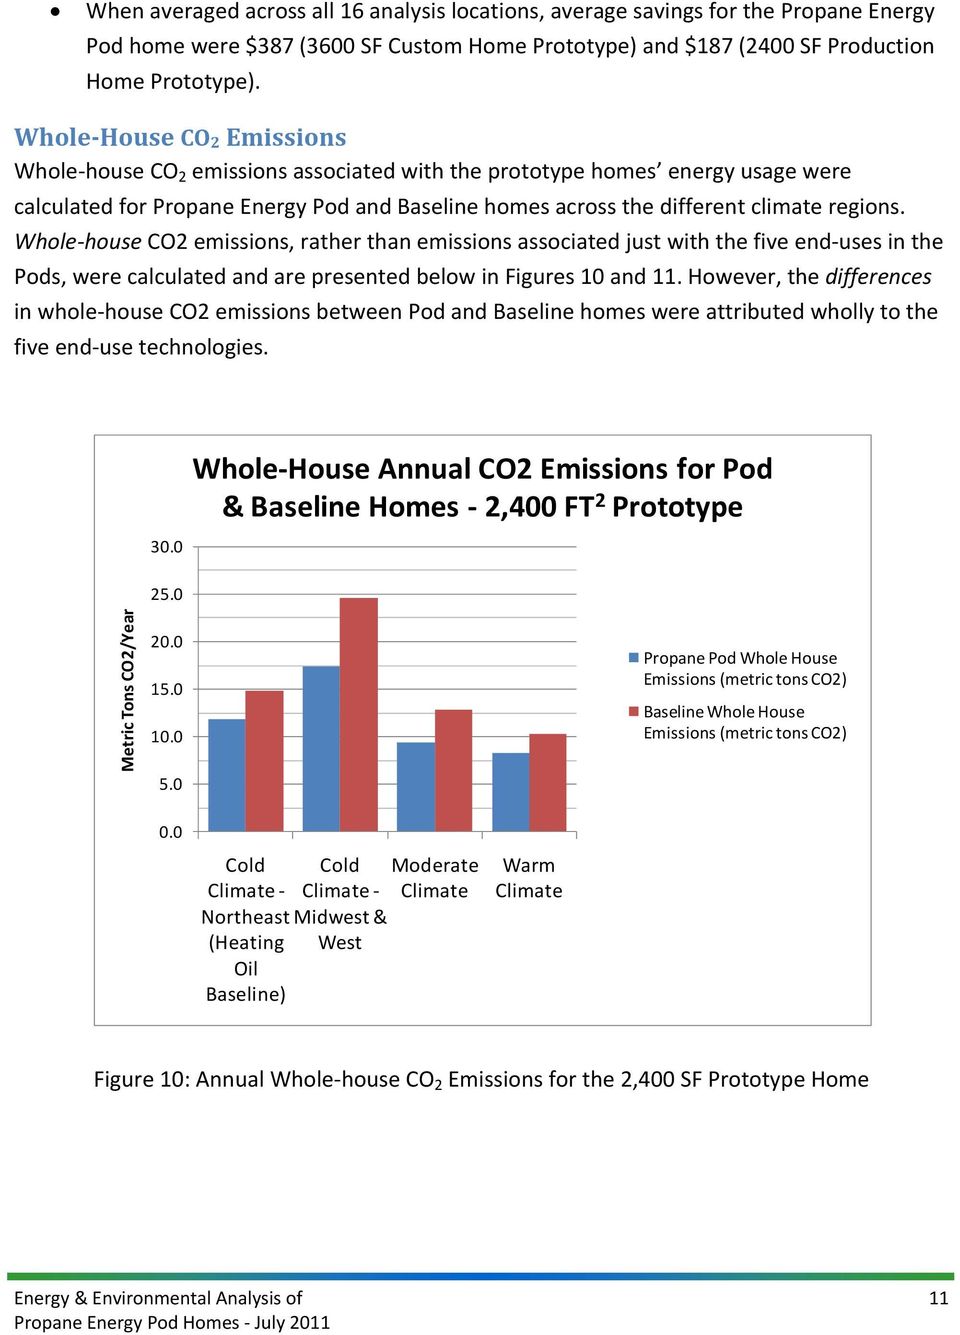 Whole house CO2 emissions, rather than emissions associated just with the five end uses in the Pods, were calculated and are presented below in Figures 10 and 11.